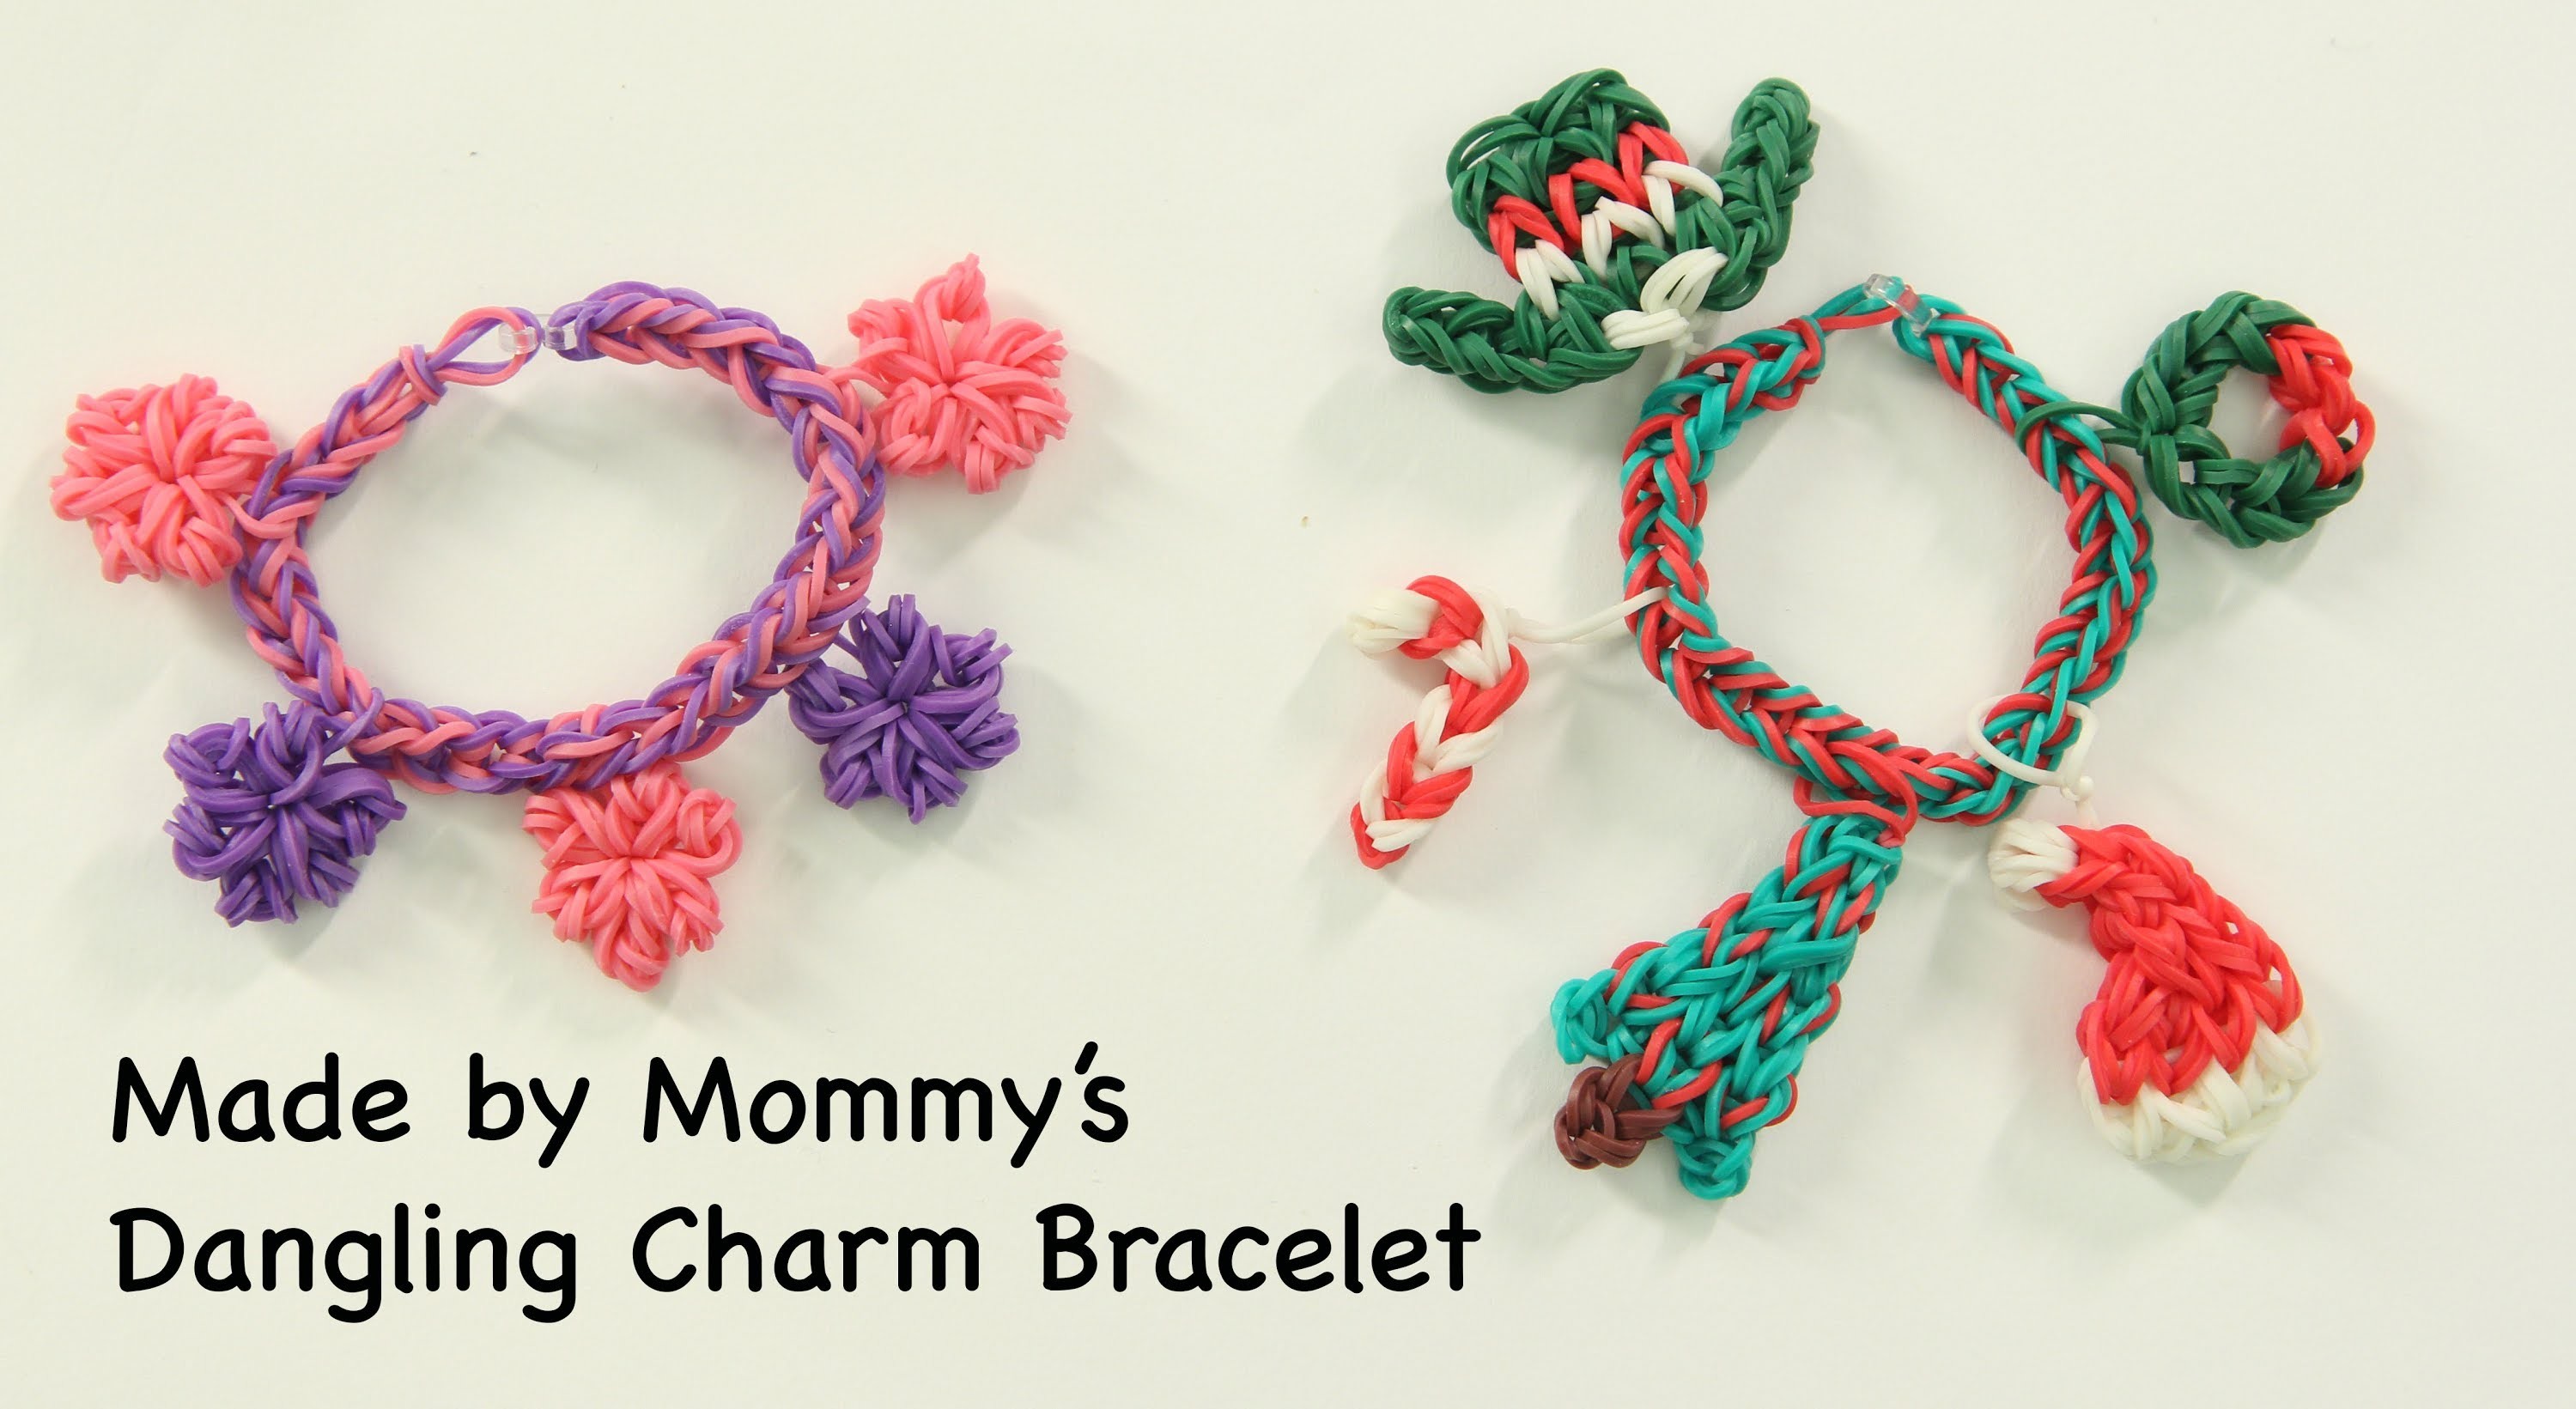 Dangling Charm Bracelet without the Rainbow Loom